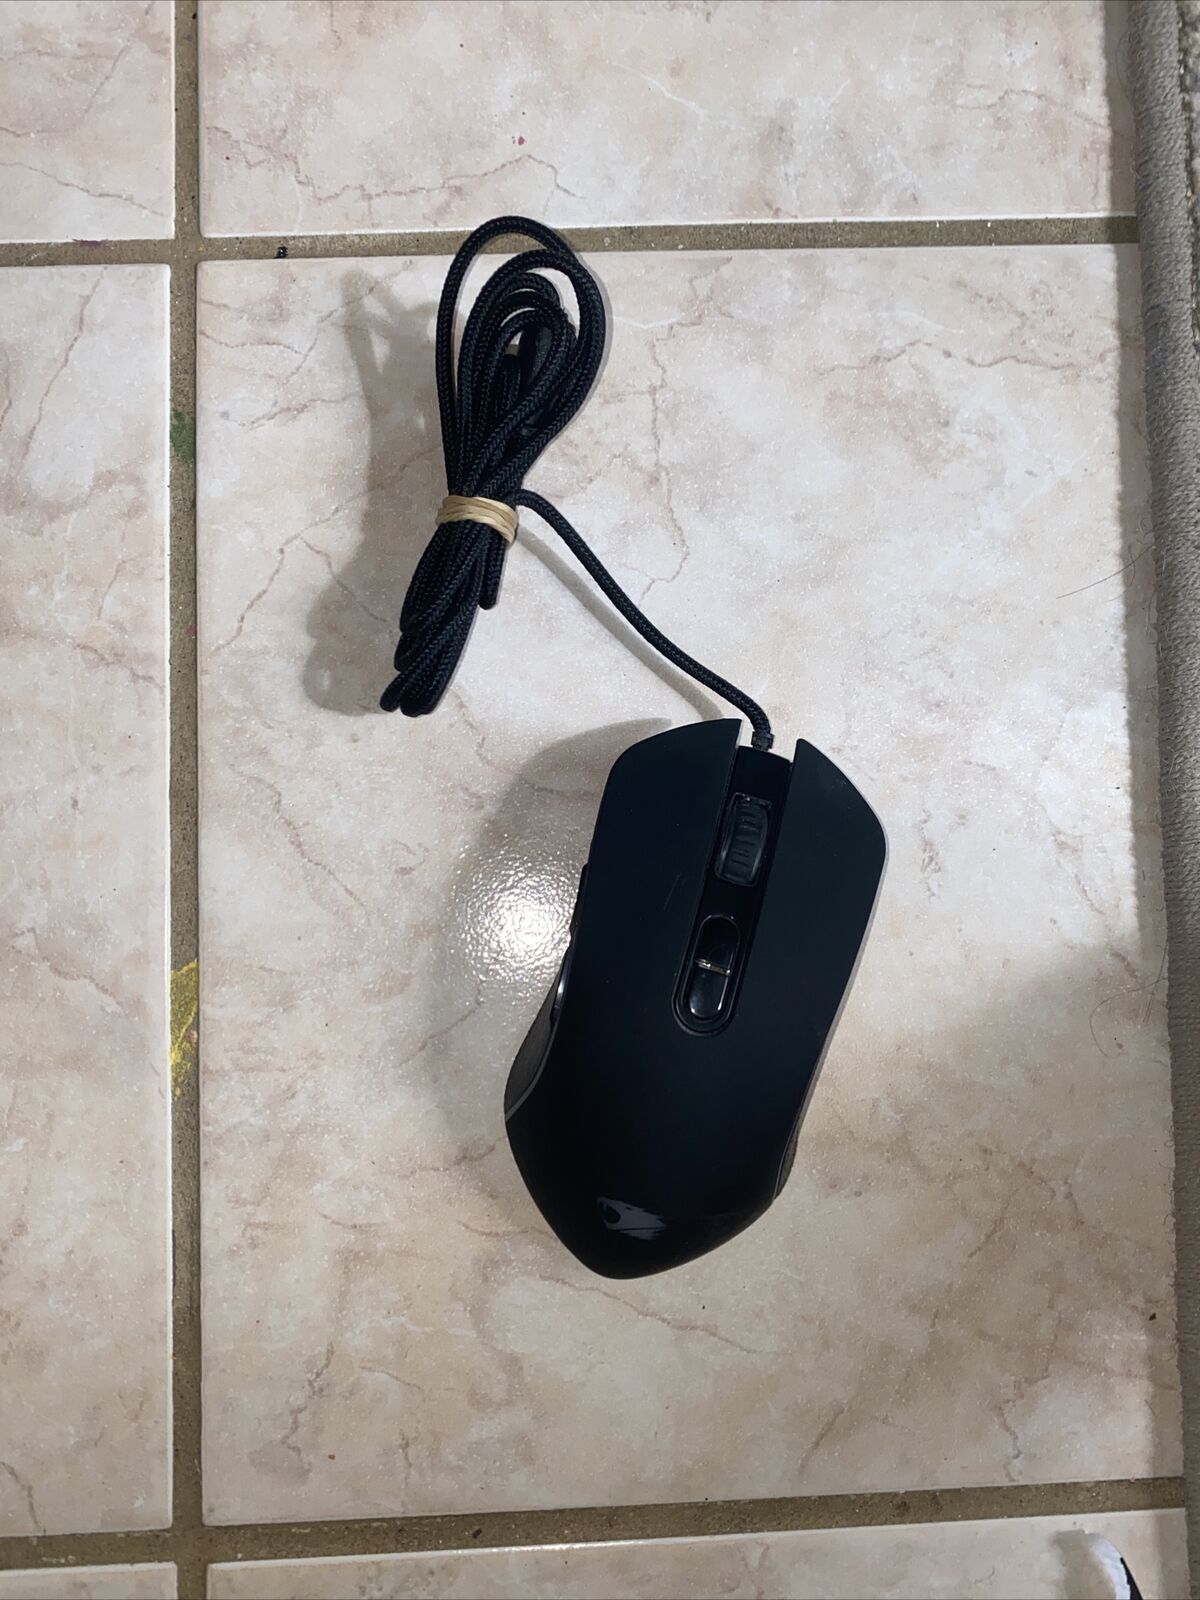 Ares M2 Gaming Mouse iBUYPOWER IBP-ARES M2 MS